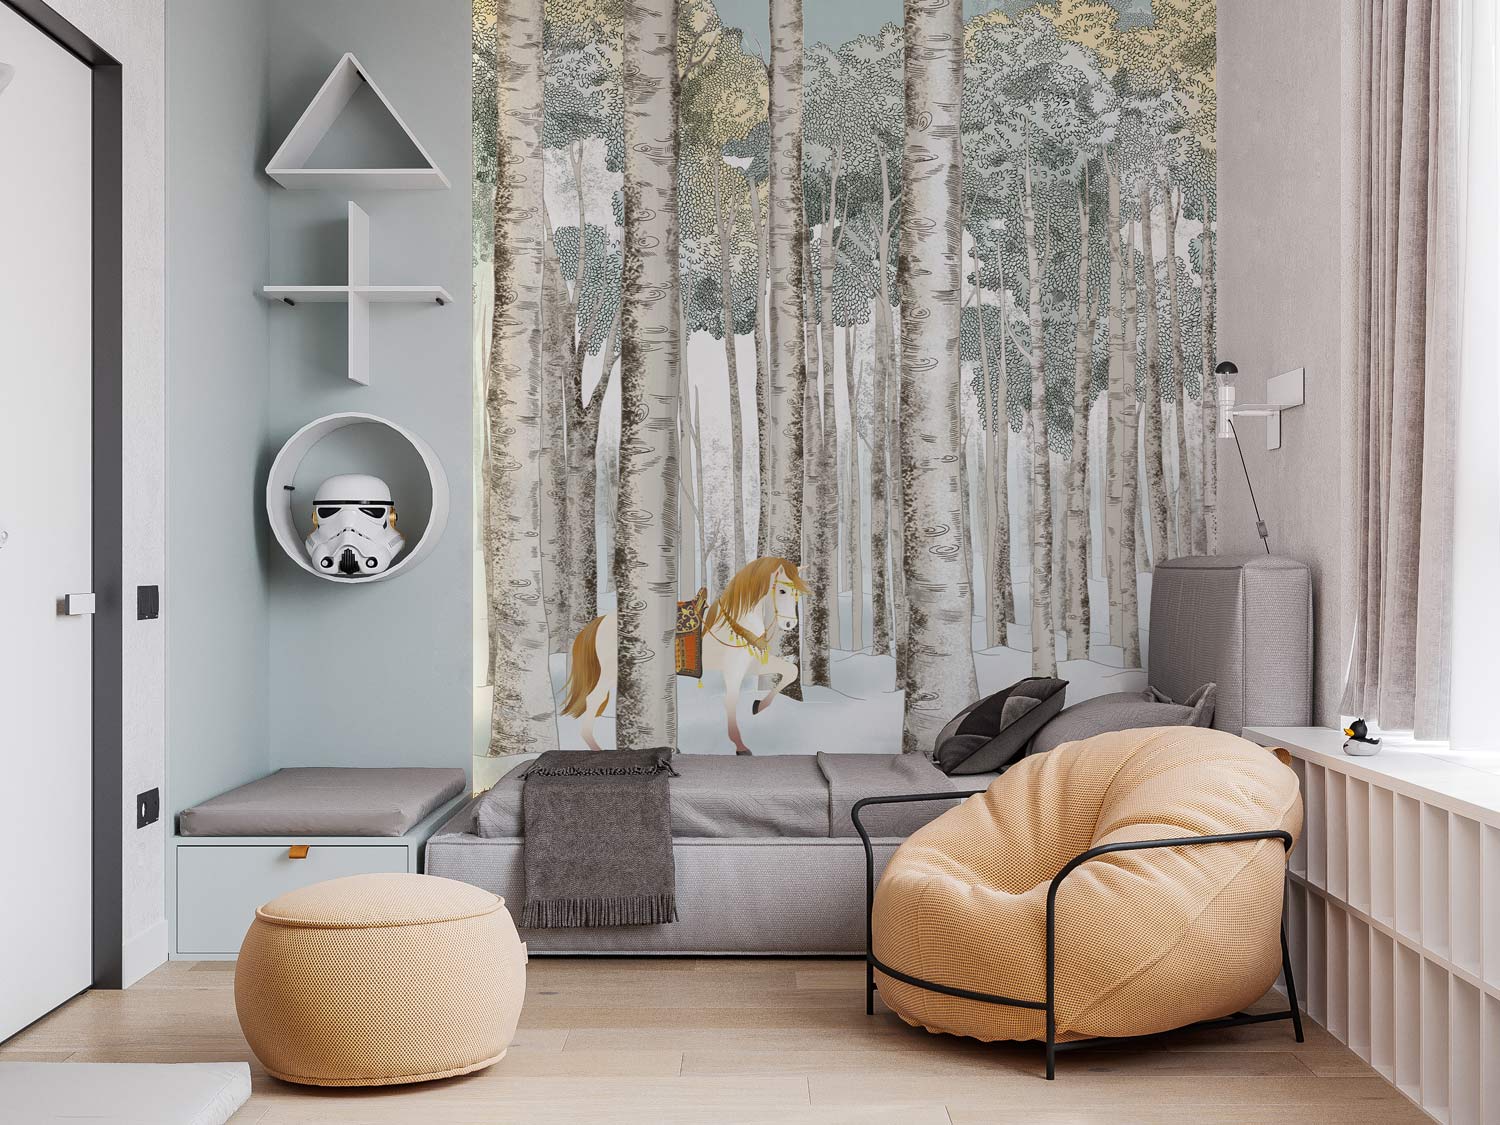 Wallpaper mural with a horse in the woods, perfect for use as bedroom decor.